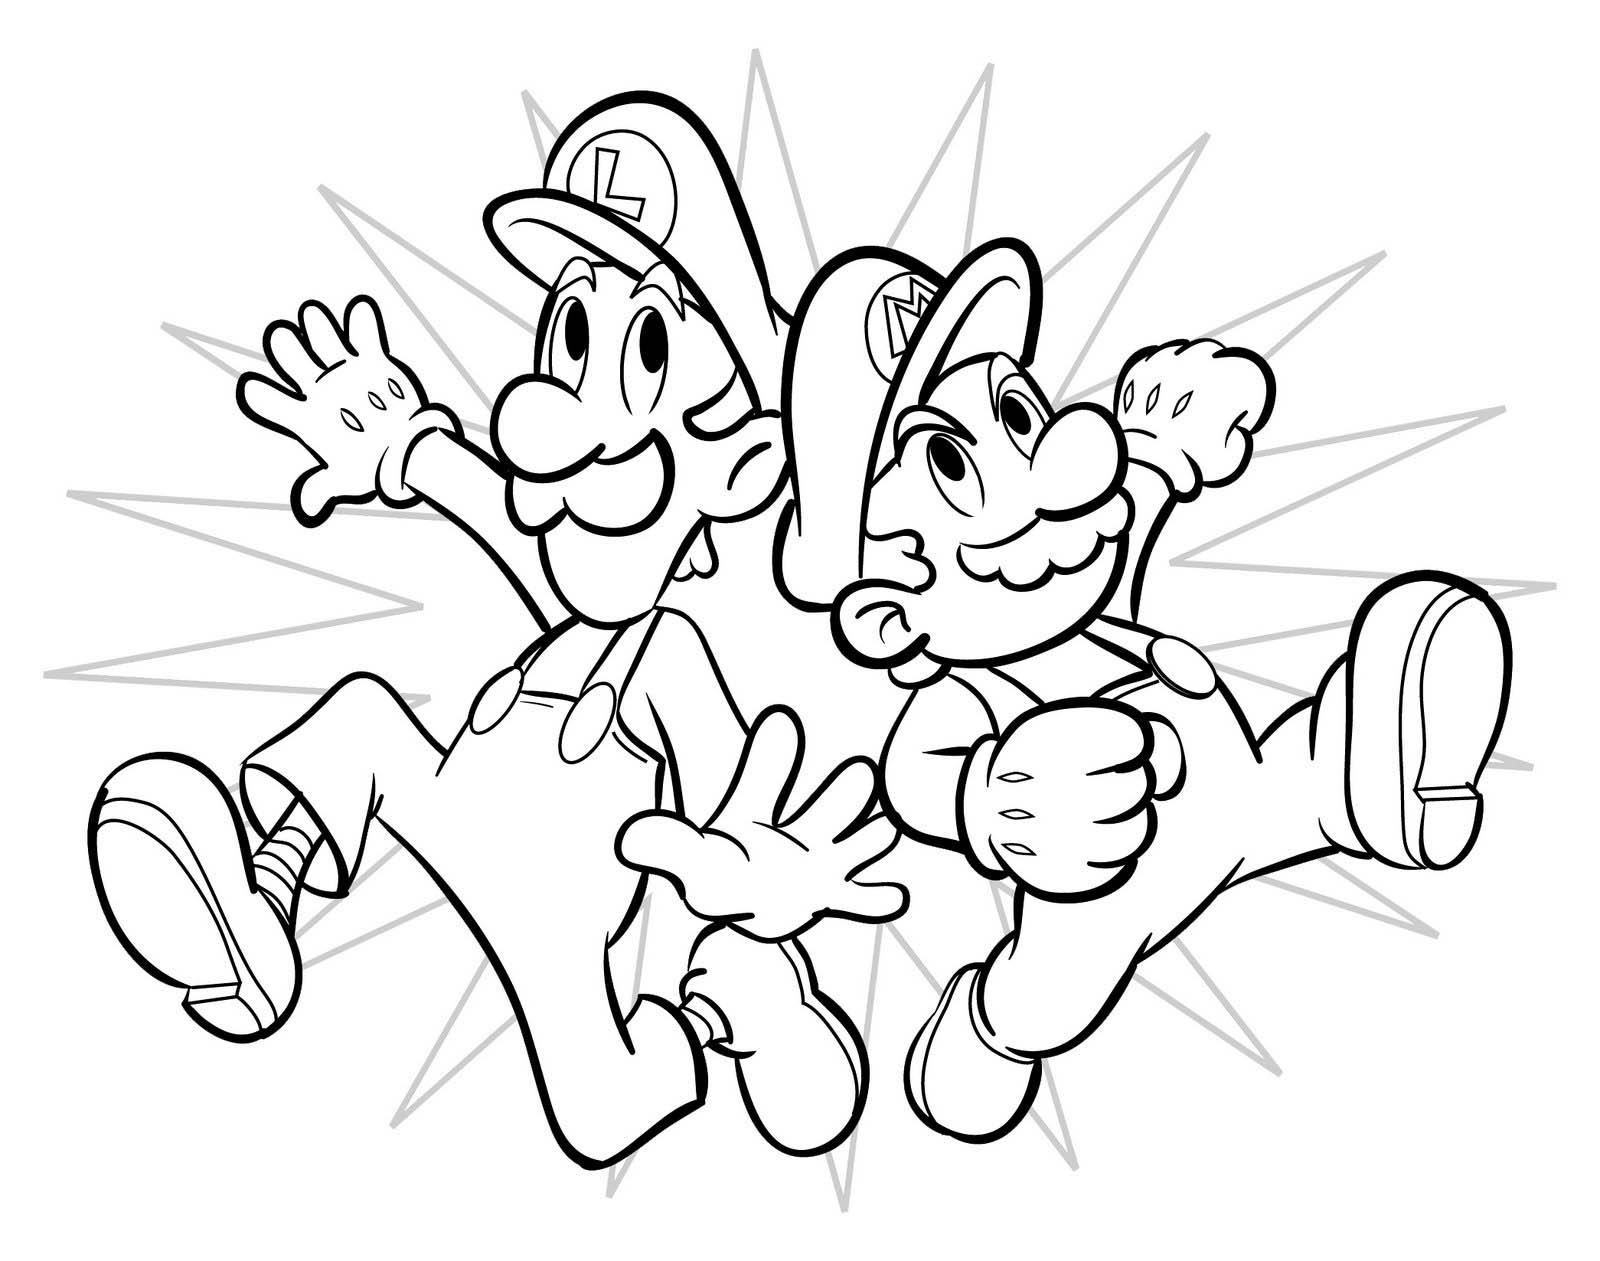 Super Mario Coloring Pages - Best Coloring Pages For Kids